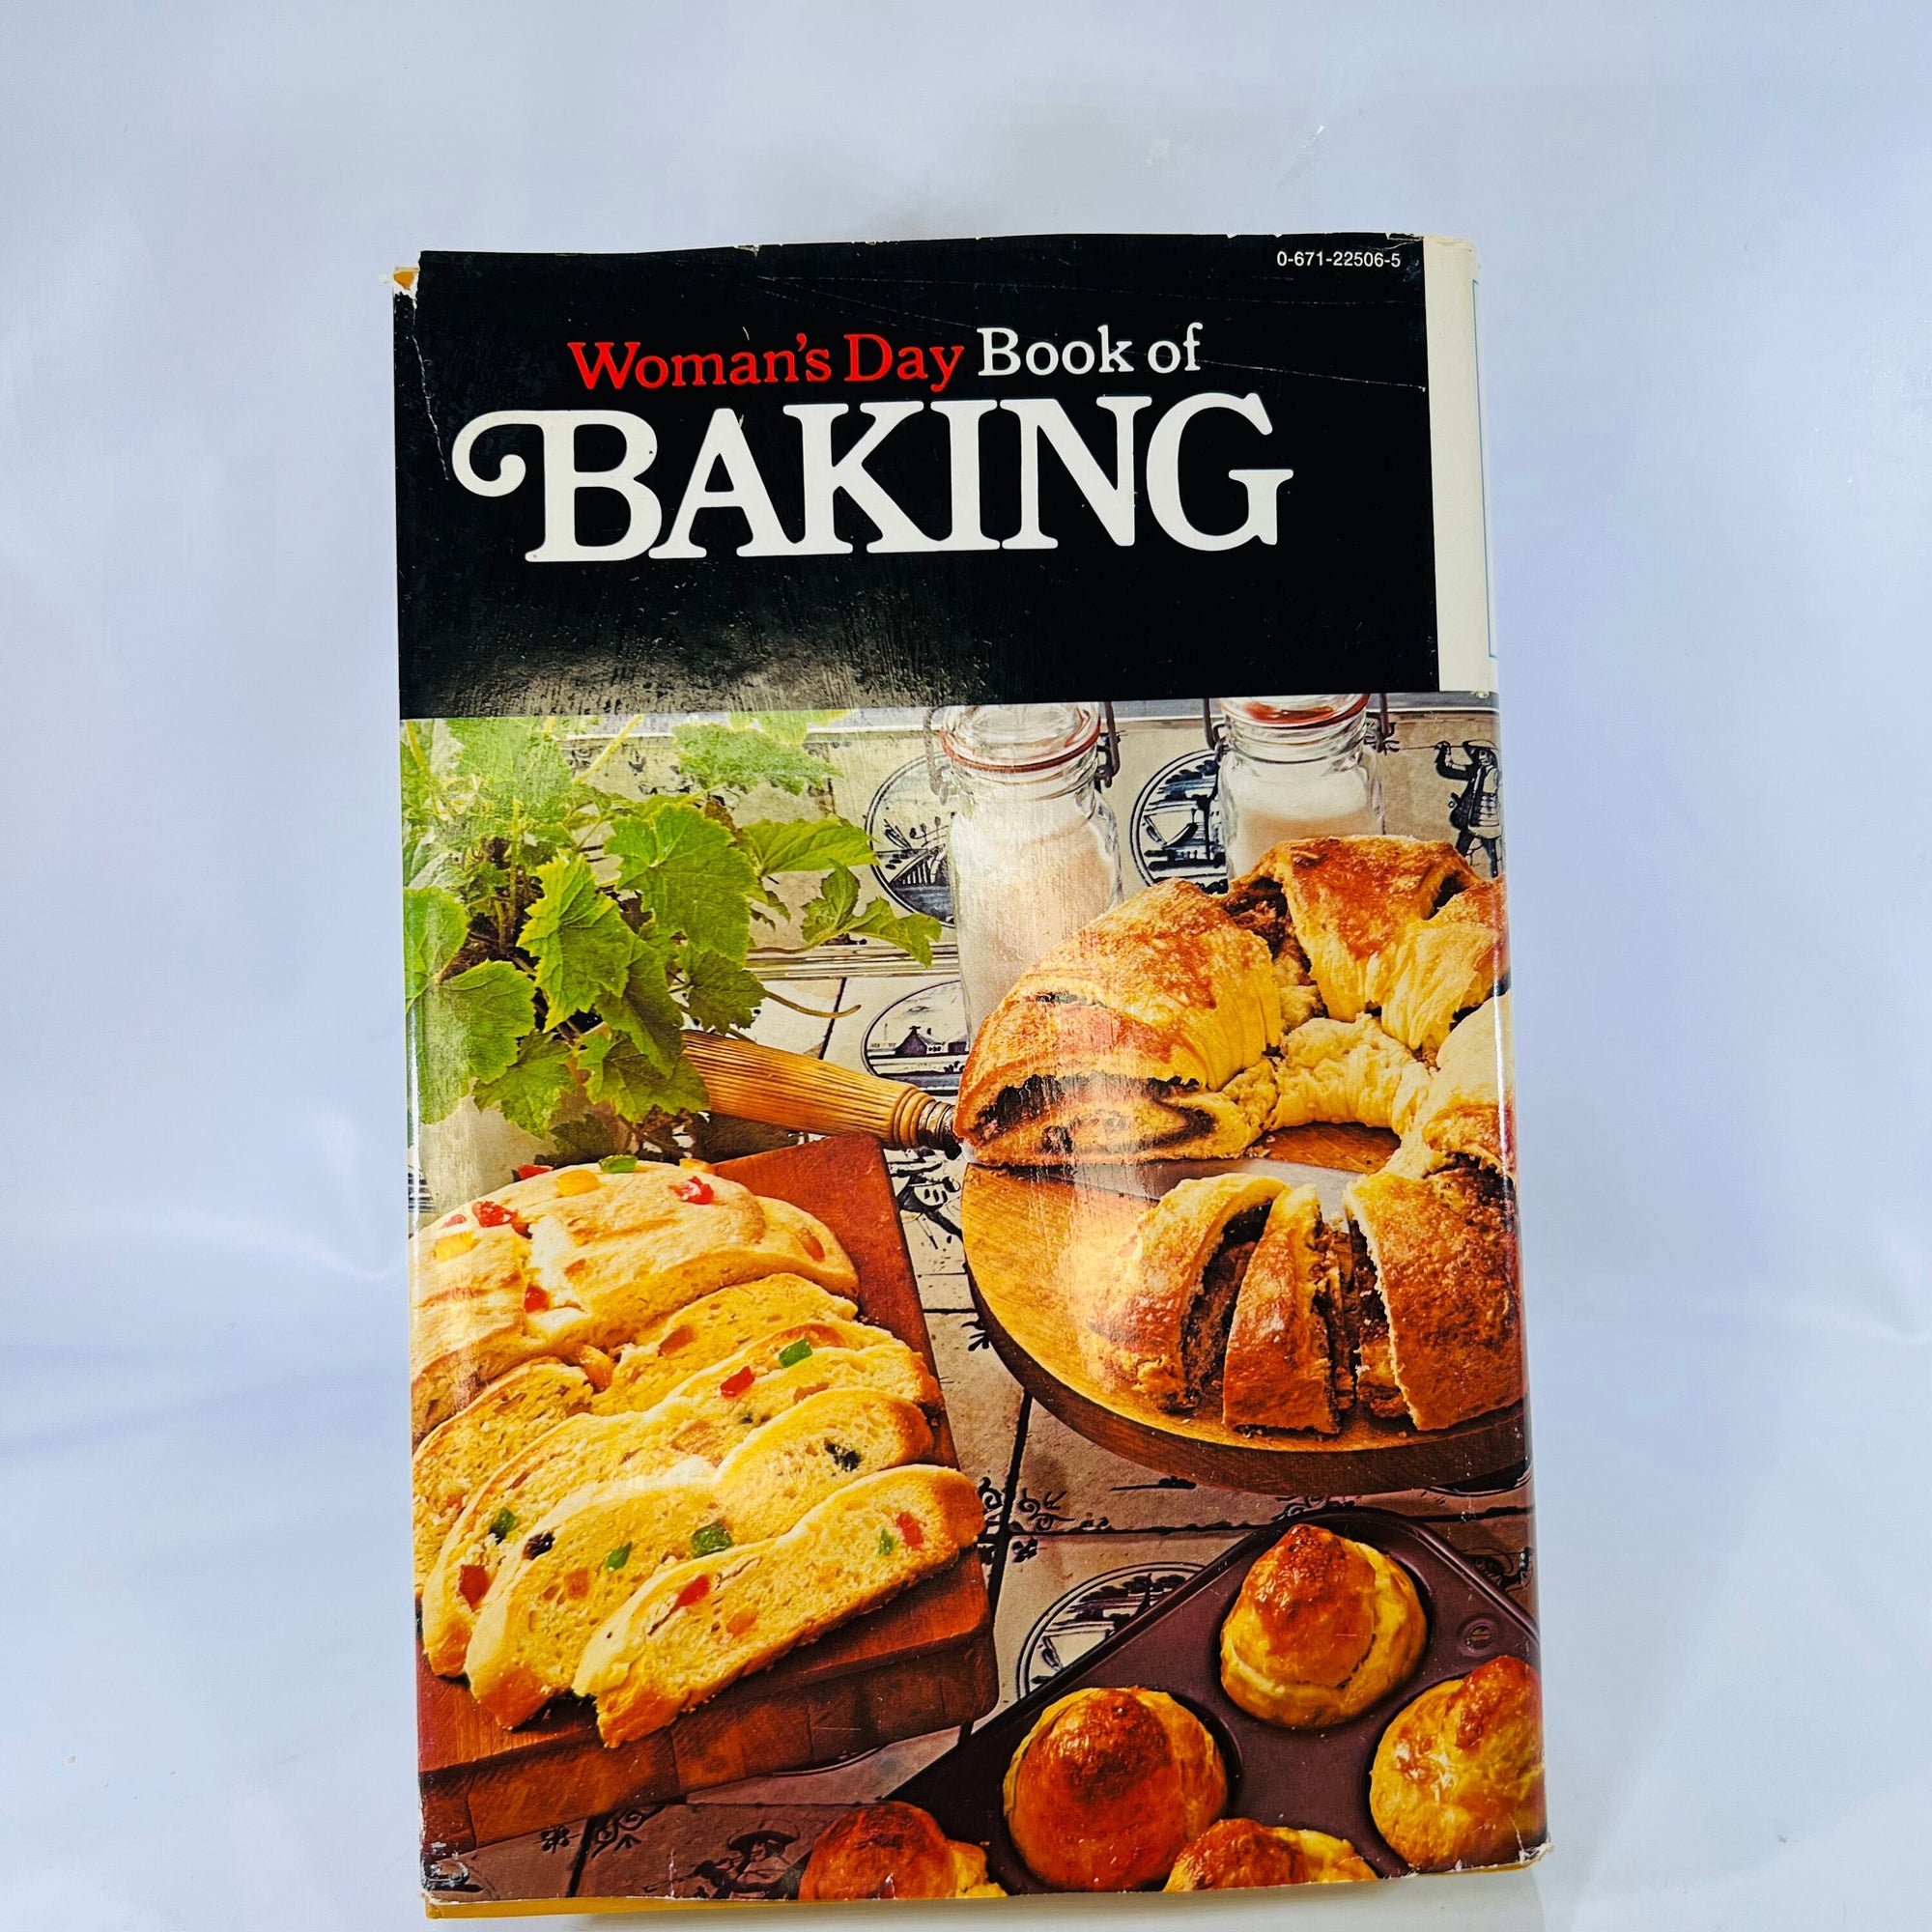 Woman's Day Book of Baking edited by Diane Harris 1977 Simon & Schuster Vintage Book